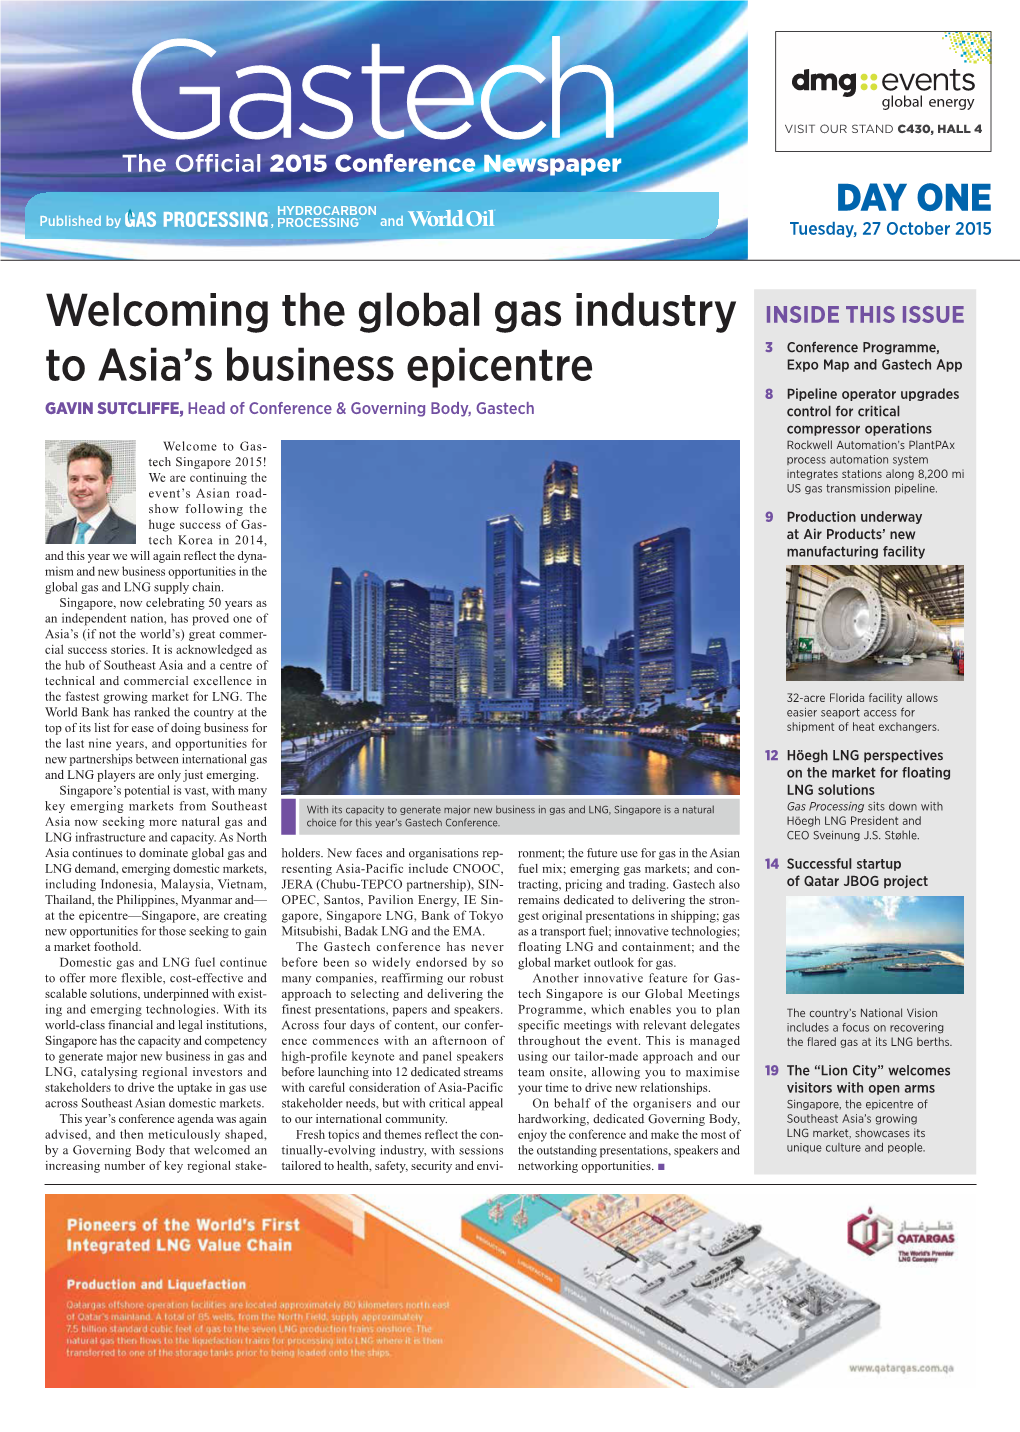 Welcoming the Global Gas Industry to Asia's Business Epicentre